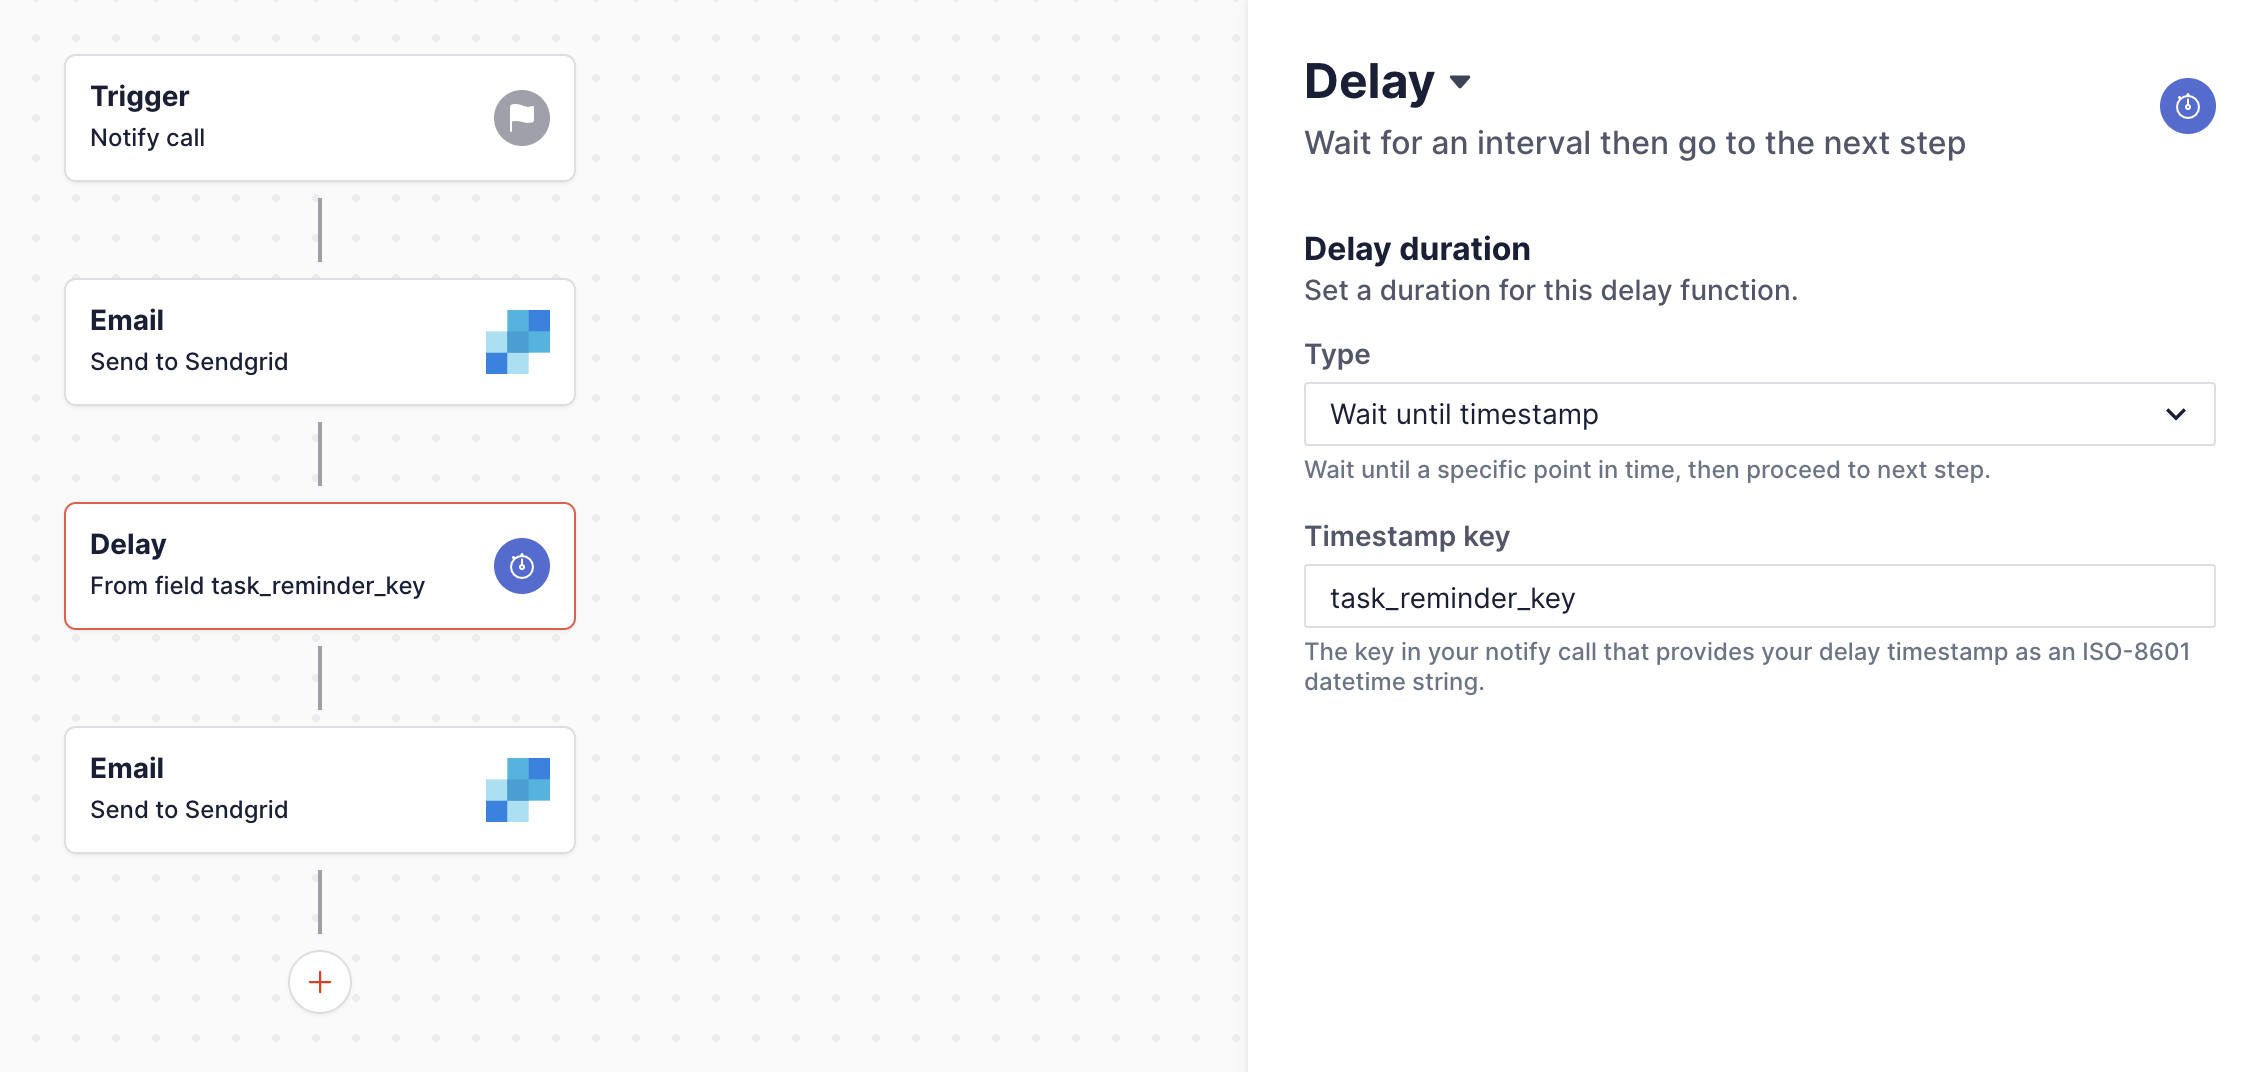 A workflow using the "wait until timestamp" delay function to remind a user about a pending task. If the task is completed before the workflow resumes, we cancel the workflow so the user doesn't receive an additional notification. 